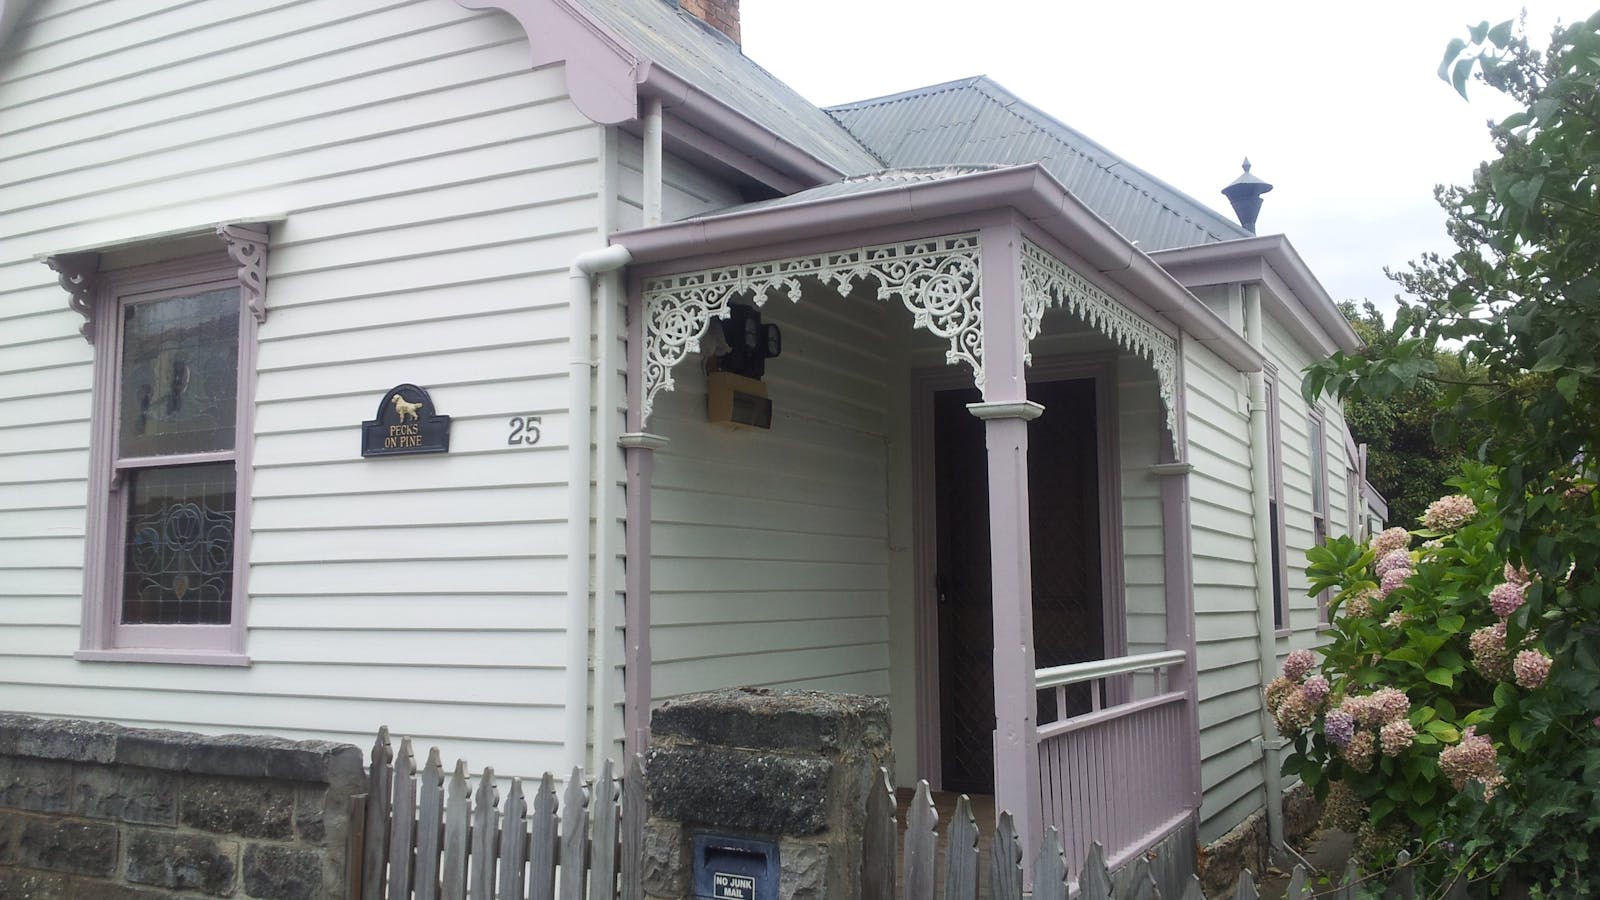 1891 Victorian 1 bedroom self-contained Cottage